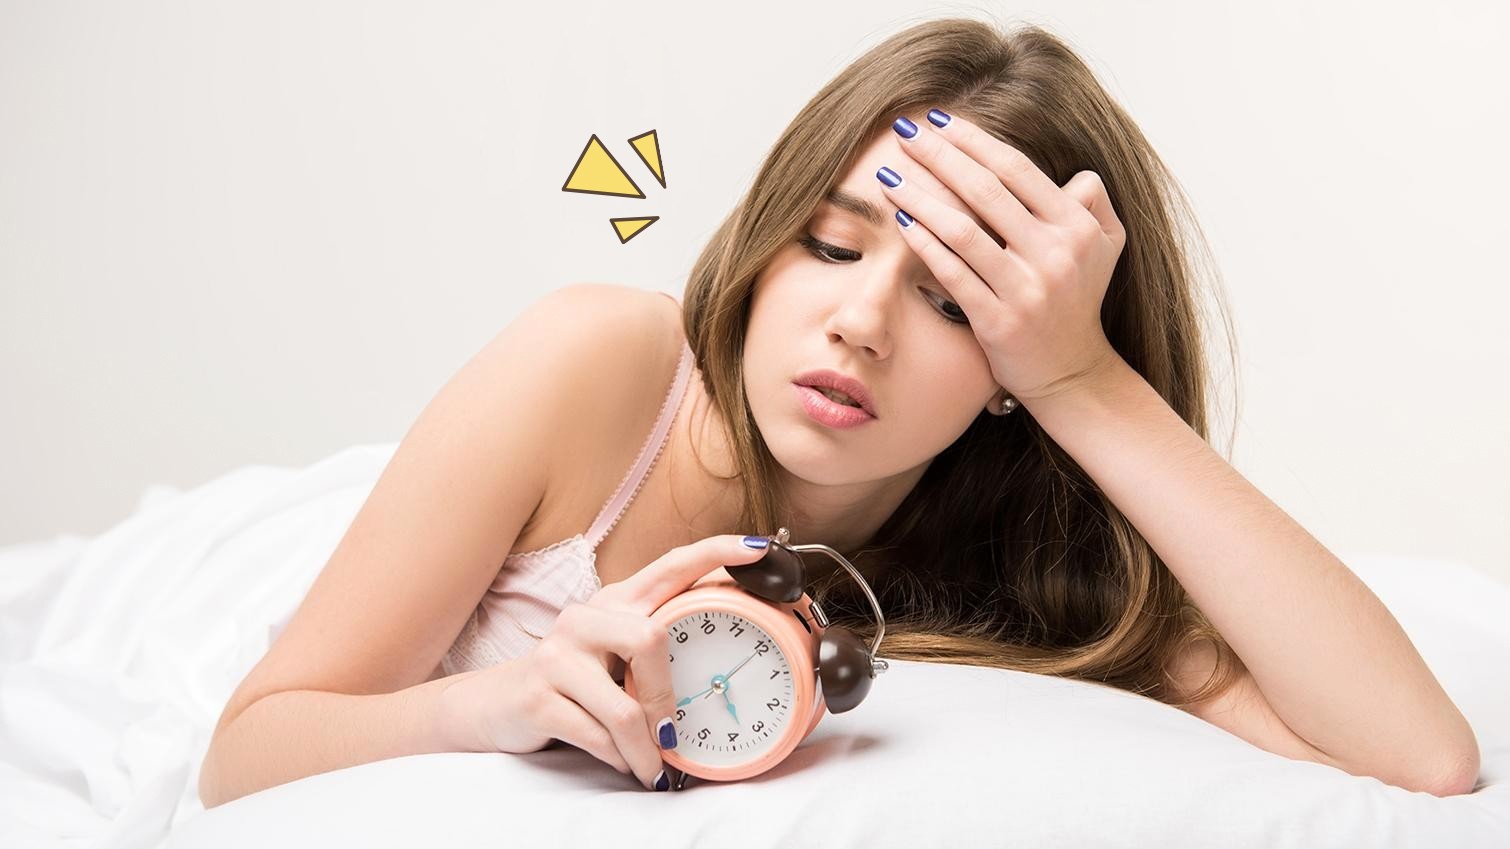 Ambien- an upgraded formula to deal with Insomnia